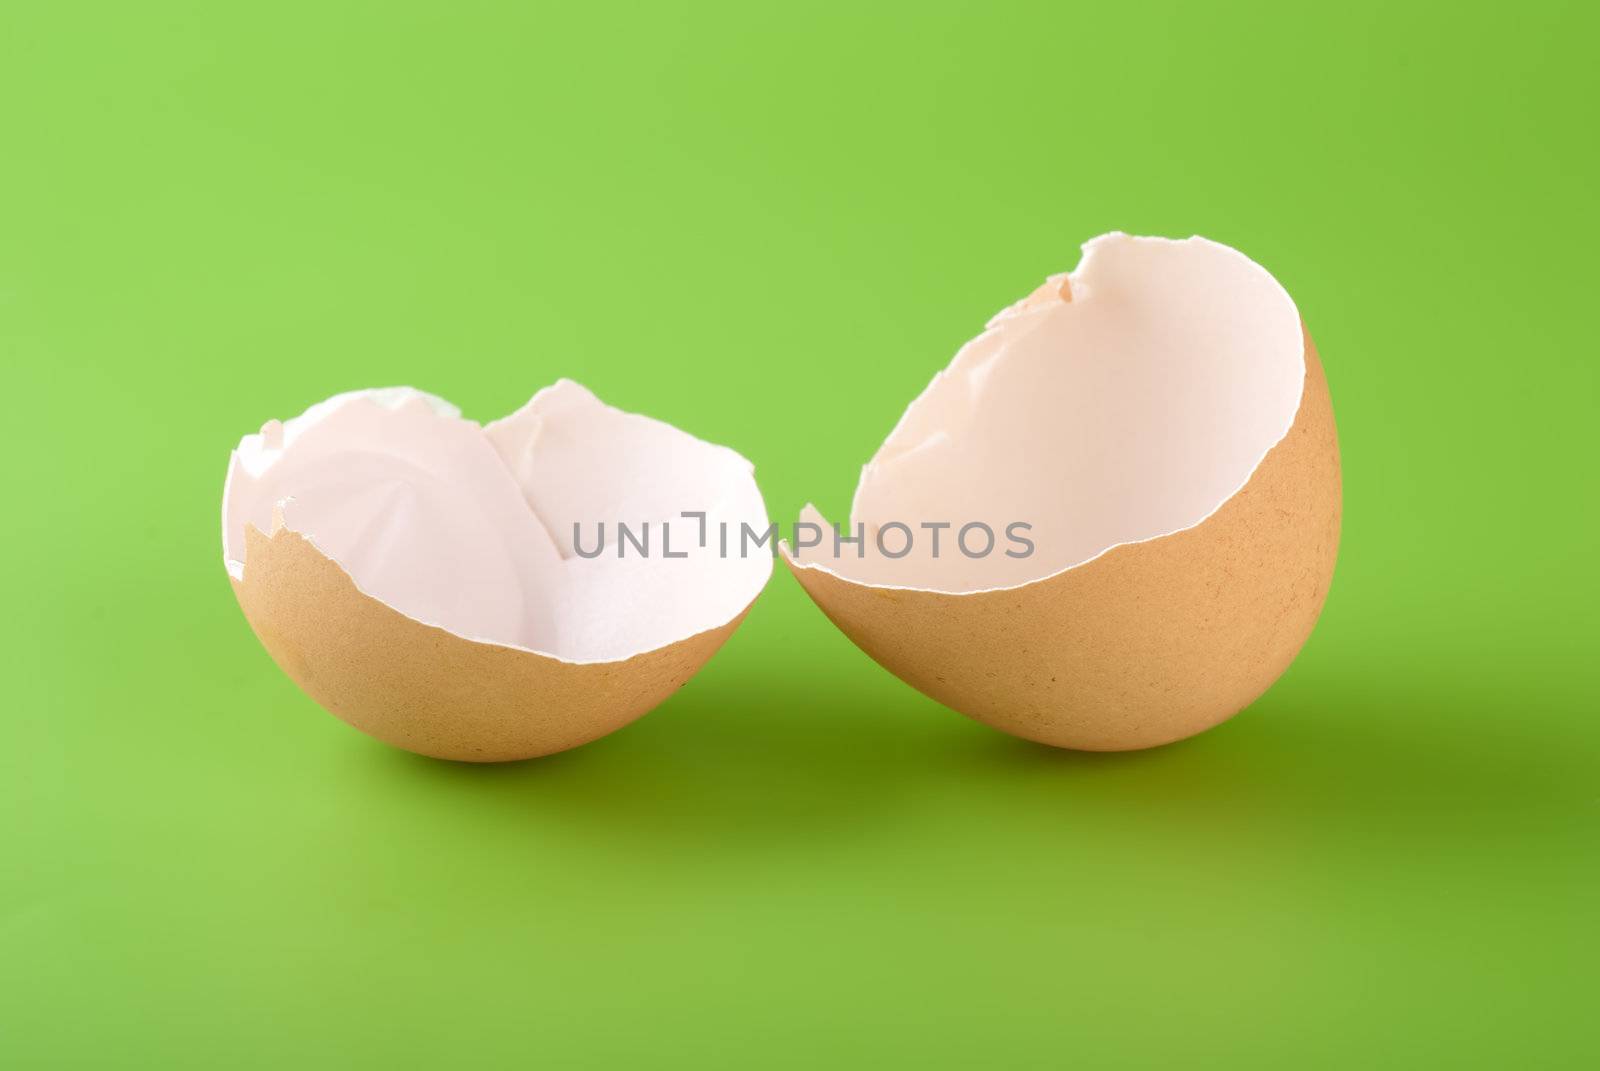 Two pieces of brown egg shell on a green background